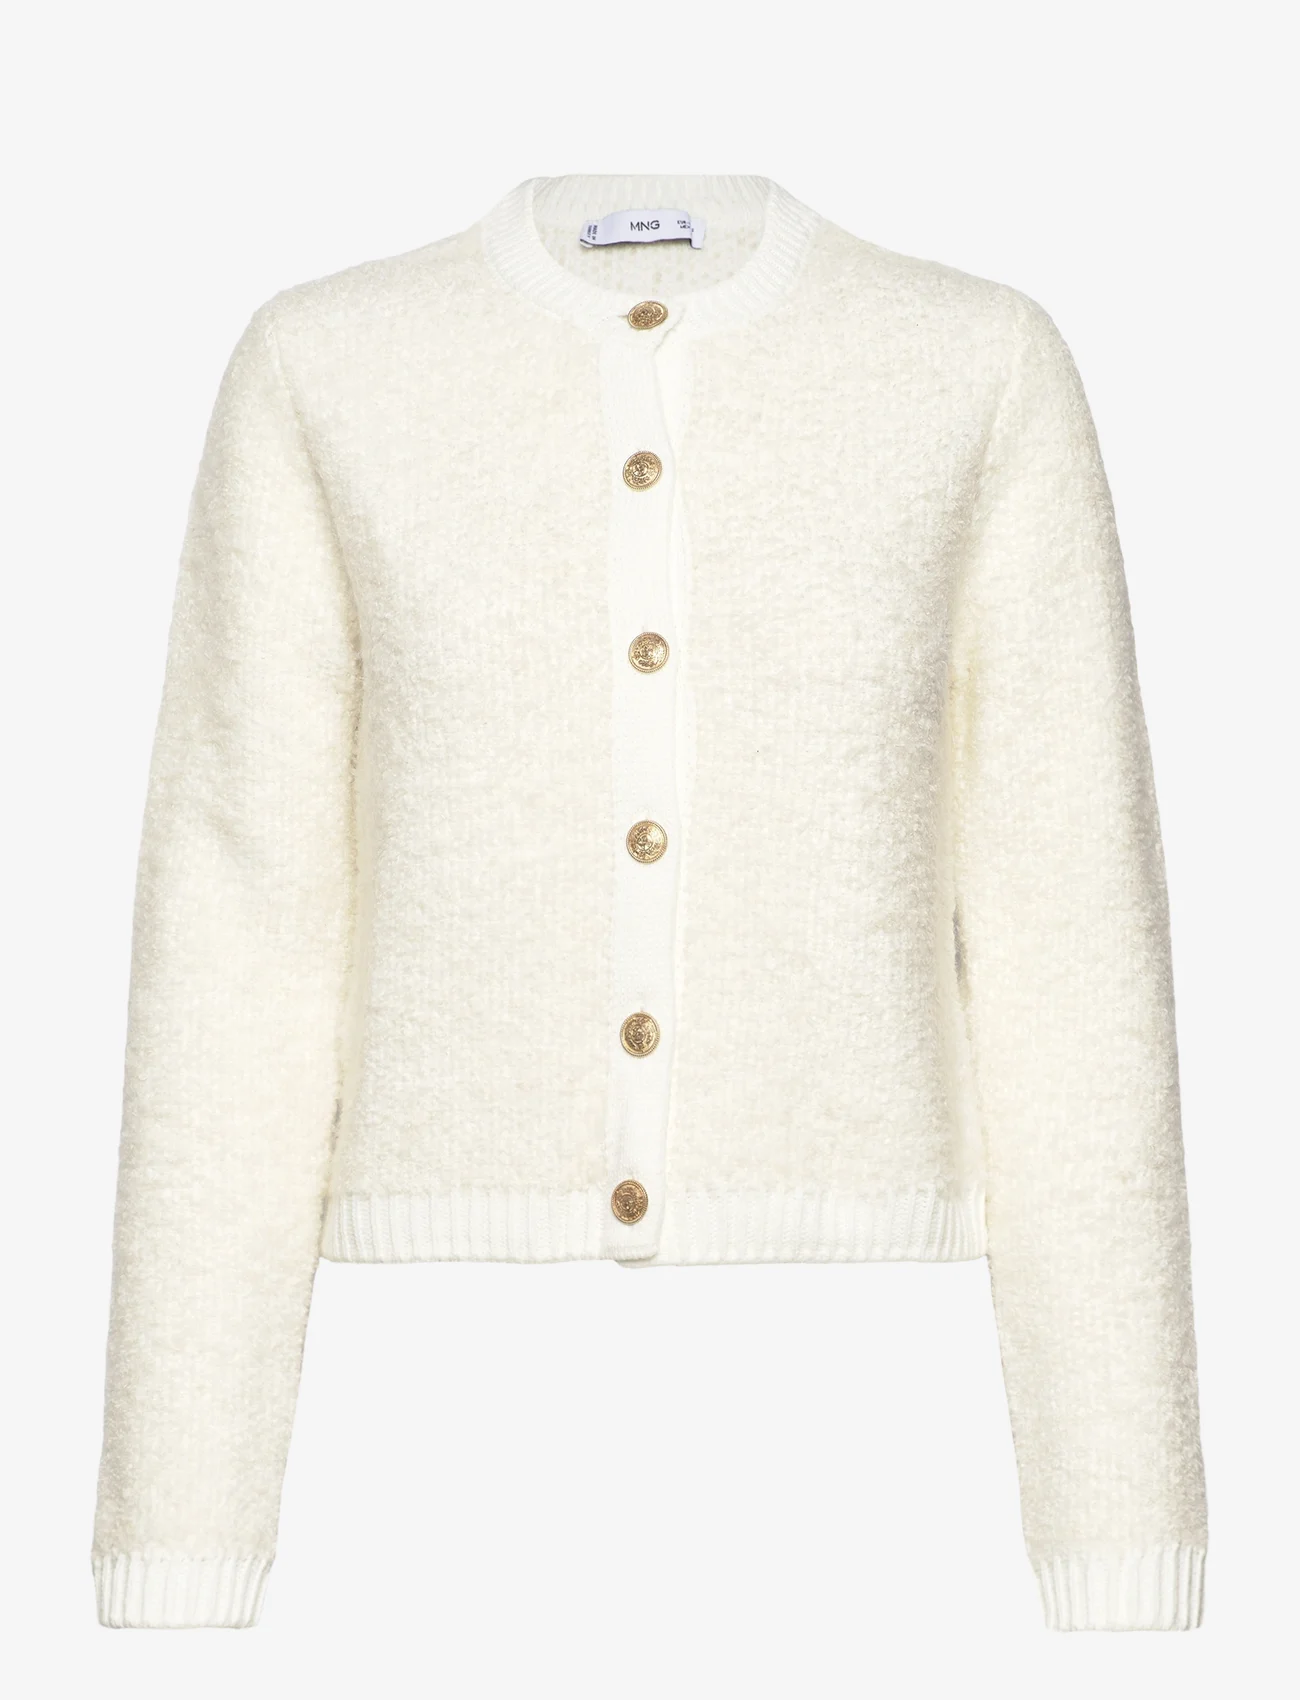 Mango - Knitted buttoned jacket - cardigans - natural white - 0